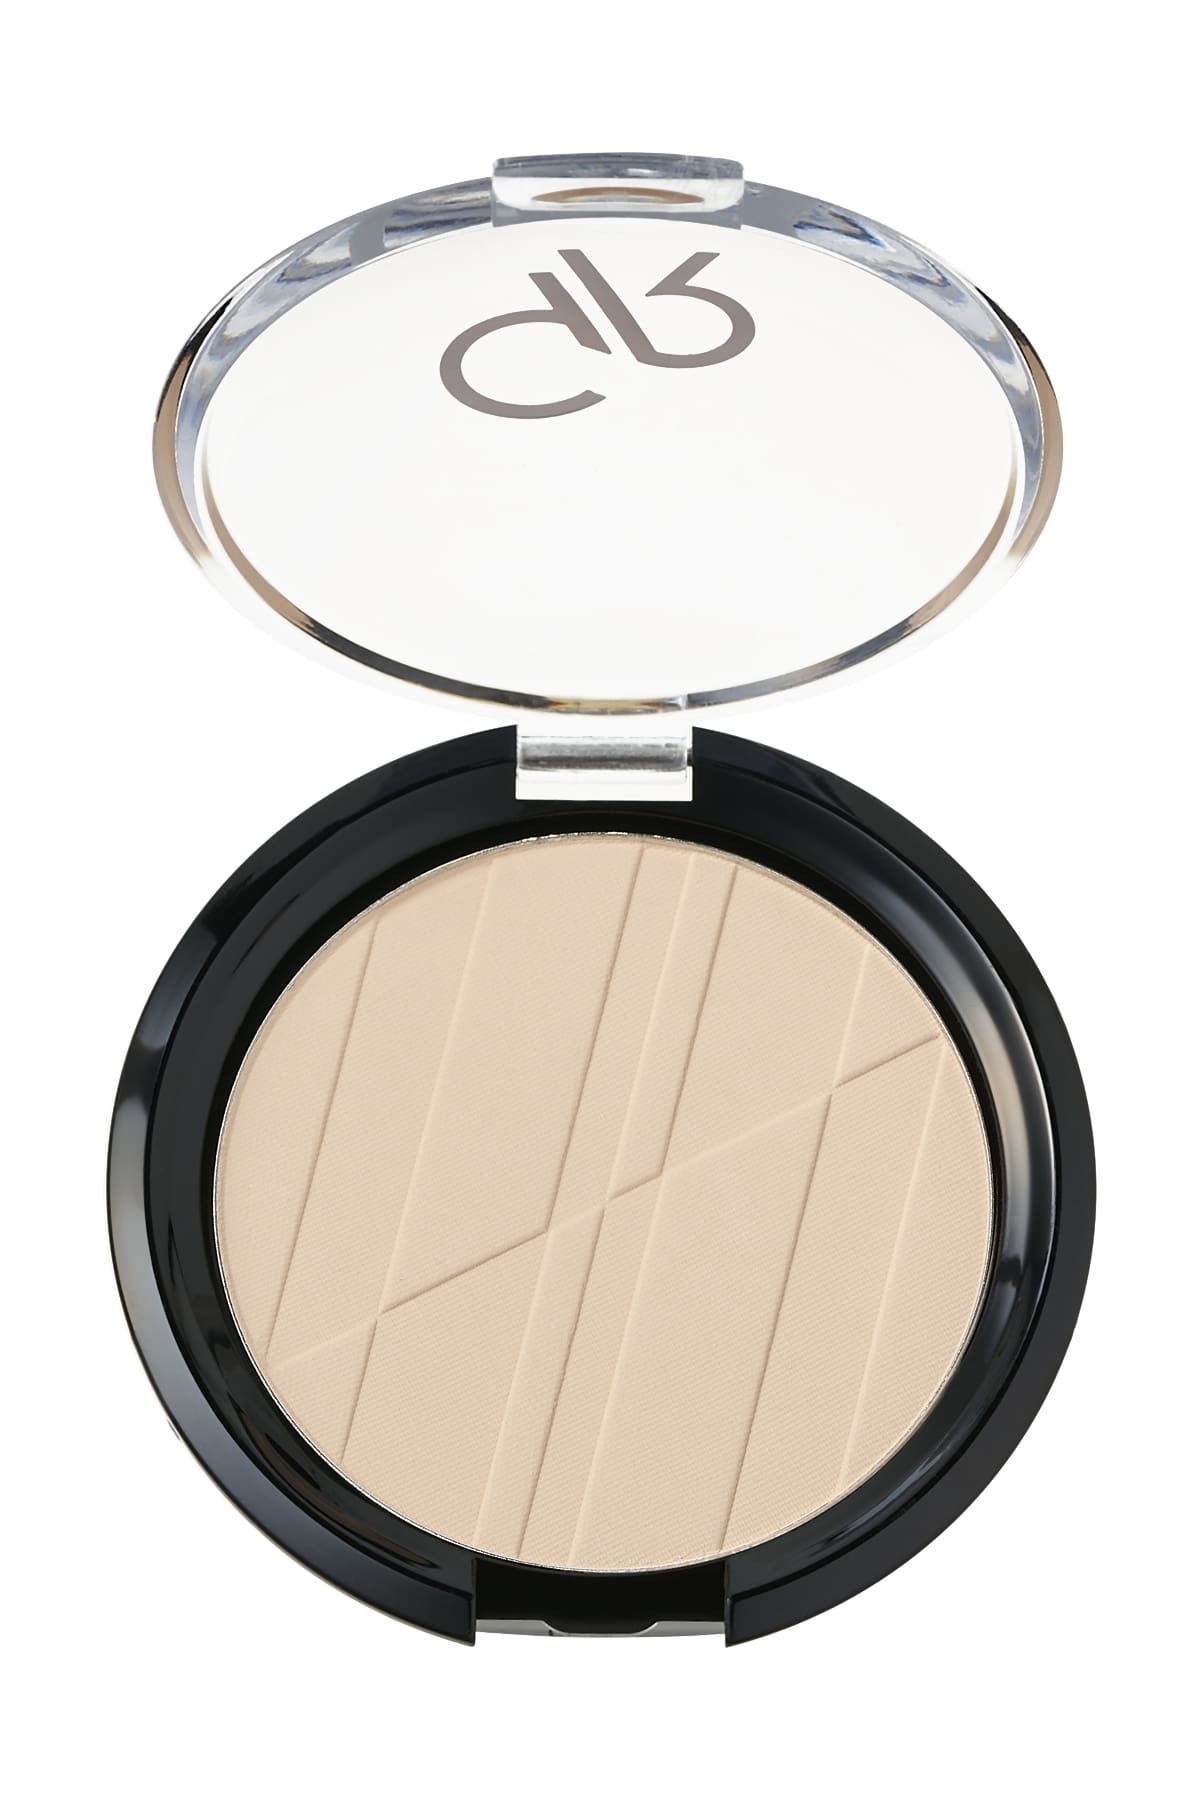 Golden Rose Pudra - Silky Touch Compact Powder No: 01 8691190115012